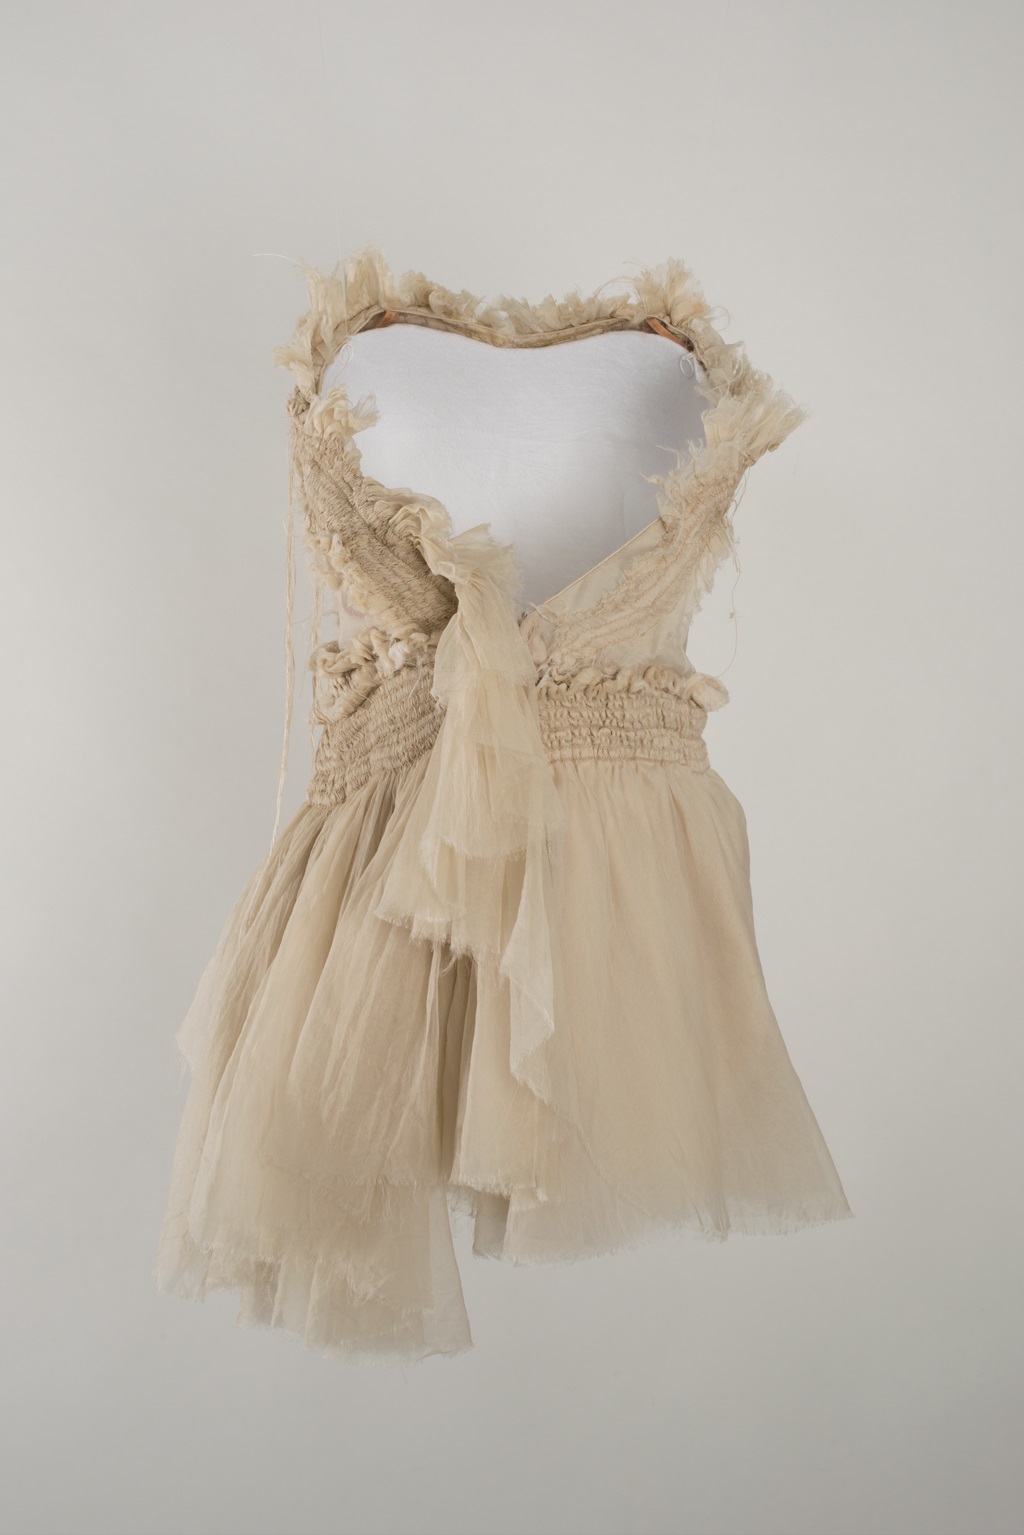 A dance costume designed by Akira Isogawa that is supported by one of the 'invisible' white moulded forms. The dress is made from off-white fabric, with a short skirt, wide v-neck and elasticated waist. The edges of the fabric are left deliberately frayed.